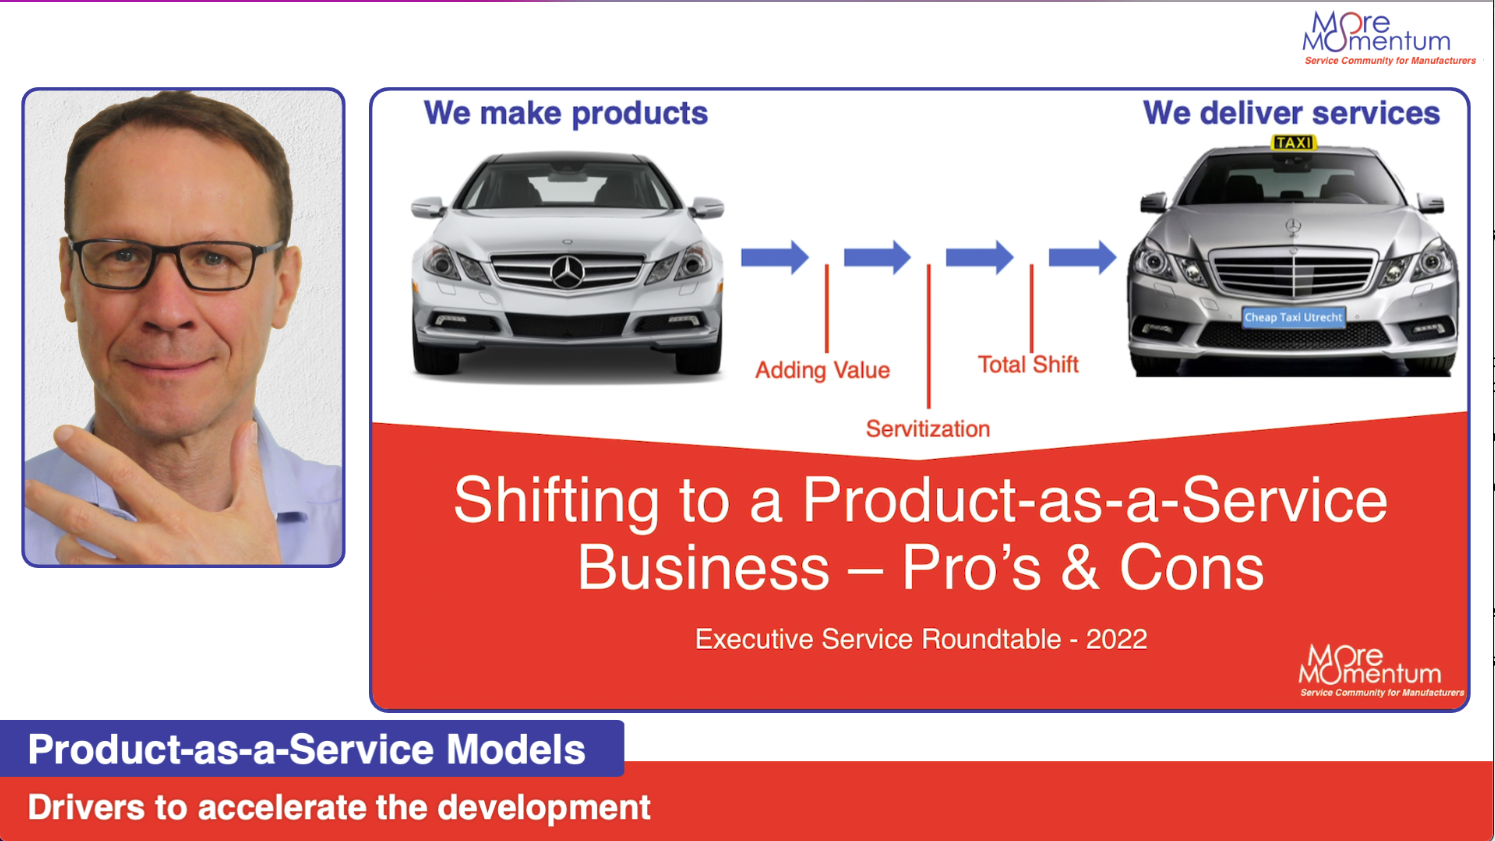 Why push Product-as-a-Service models if customers do not see the value?